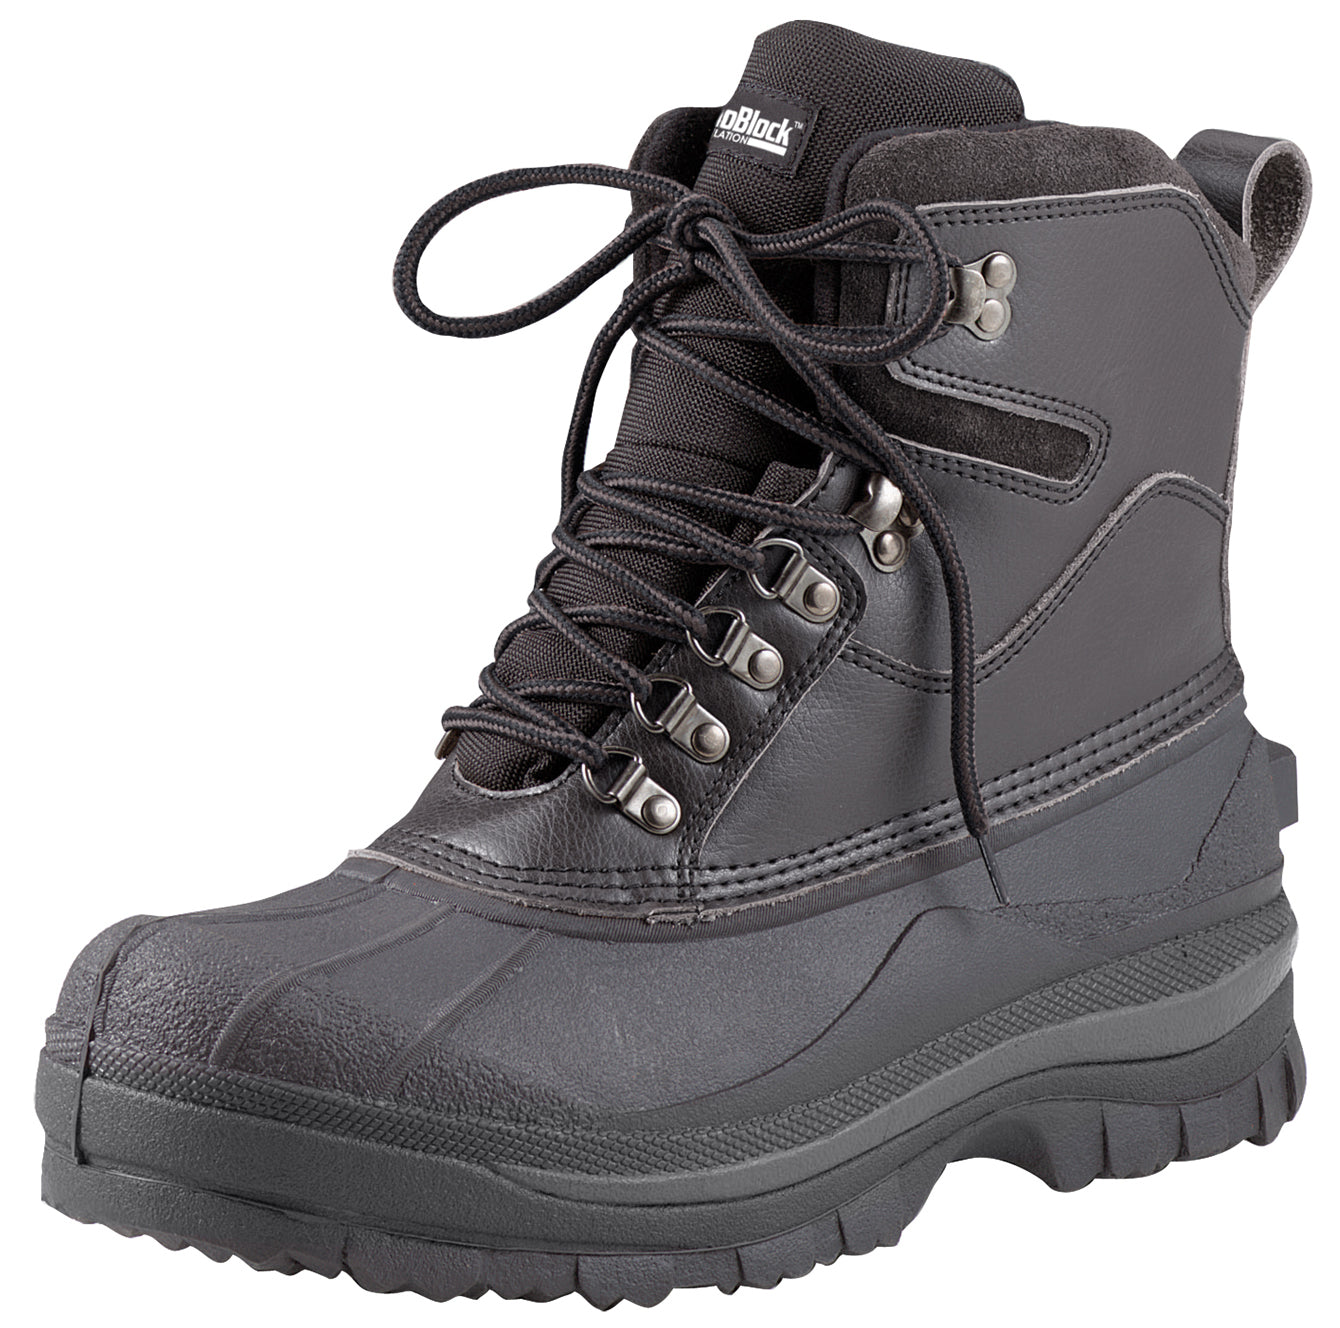 Milspec Cold Weather Hiking Boots - 8 Inch Hiking Boots MilTac Tactical Military Outdoor Gear Australia